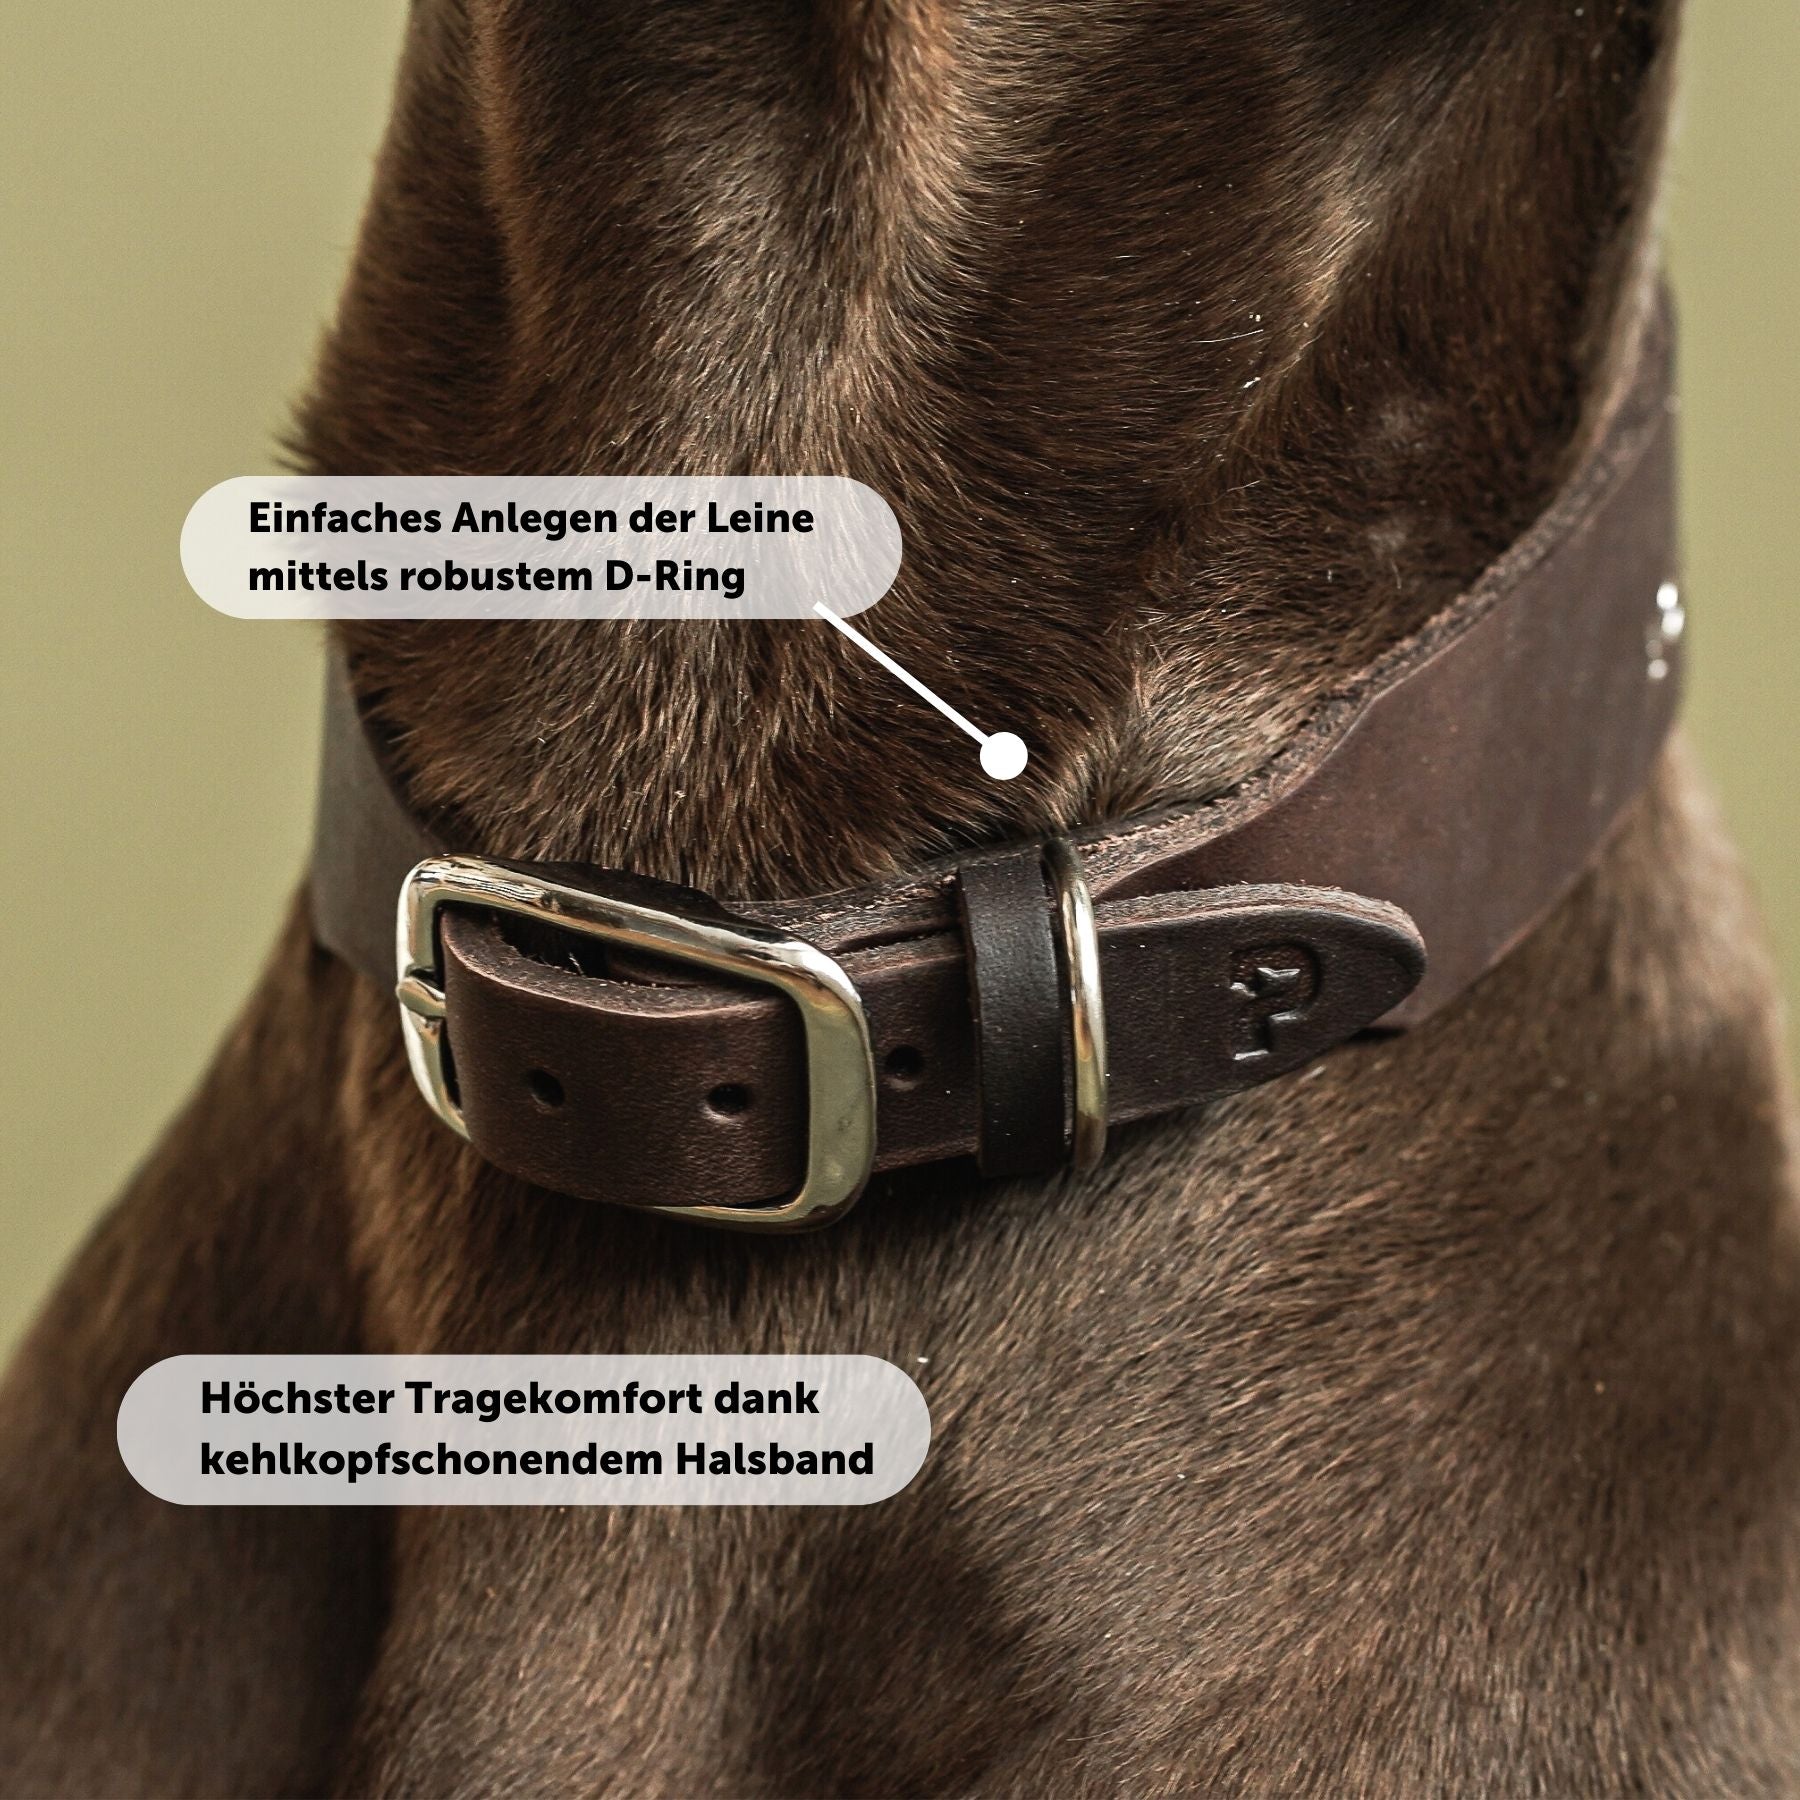 Personalizable collar with name | chestnut